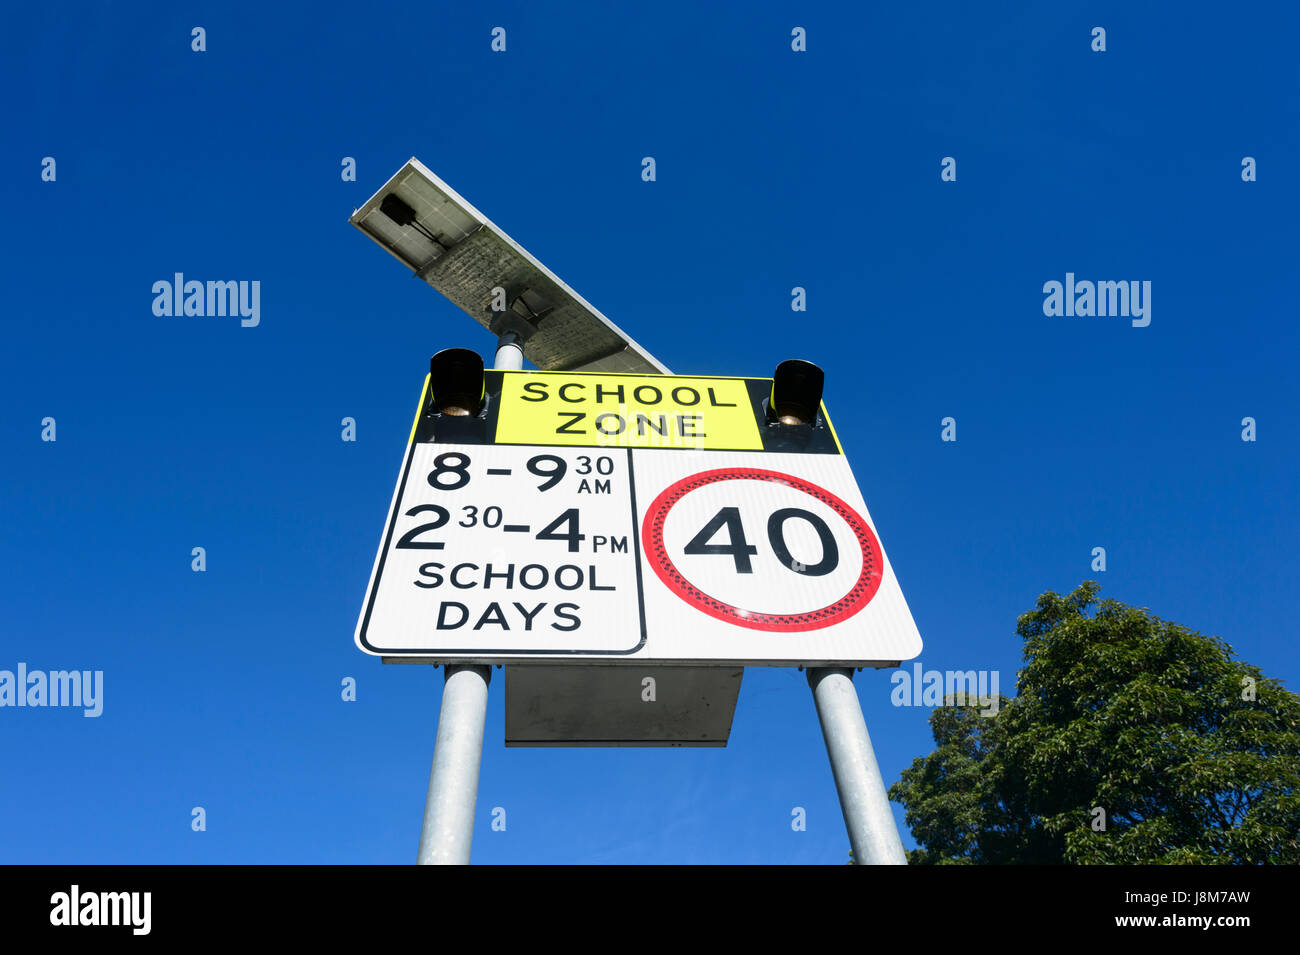 40 kmp speed limit sign in a school zone, New South Wales, NSW, Australia Stock Photo